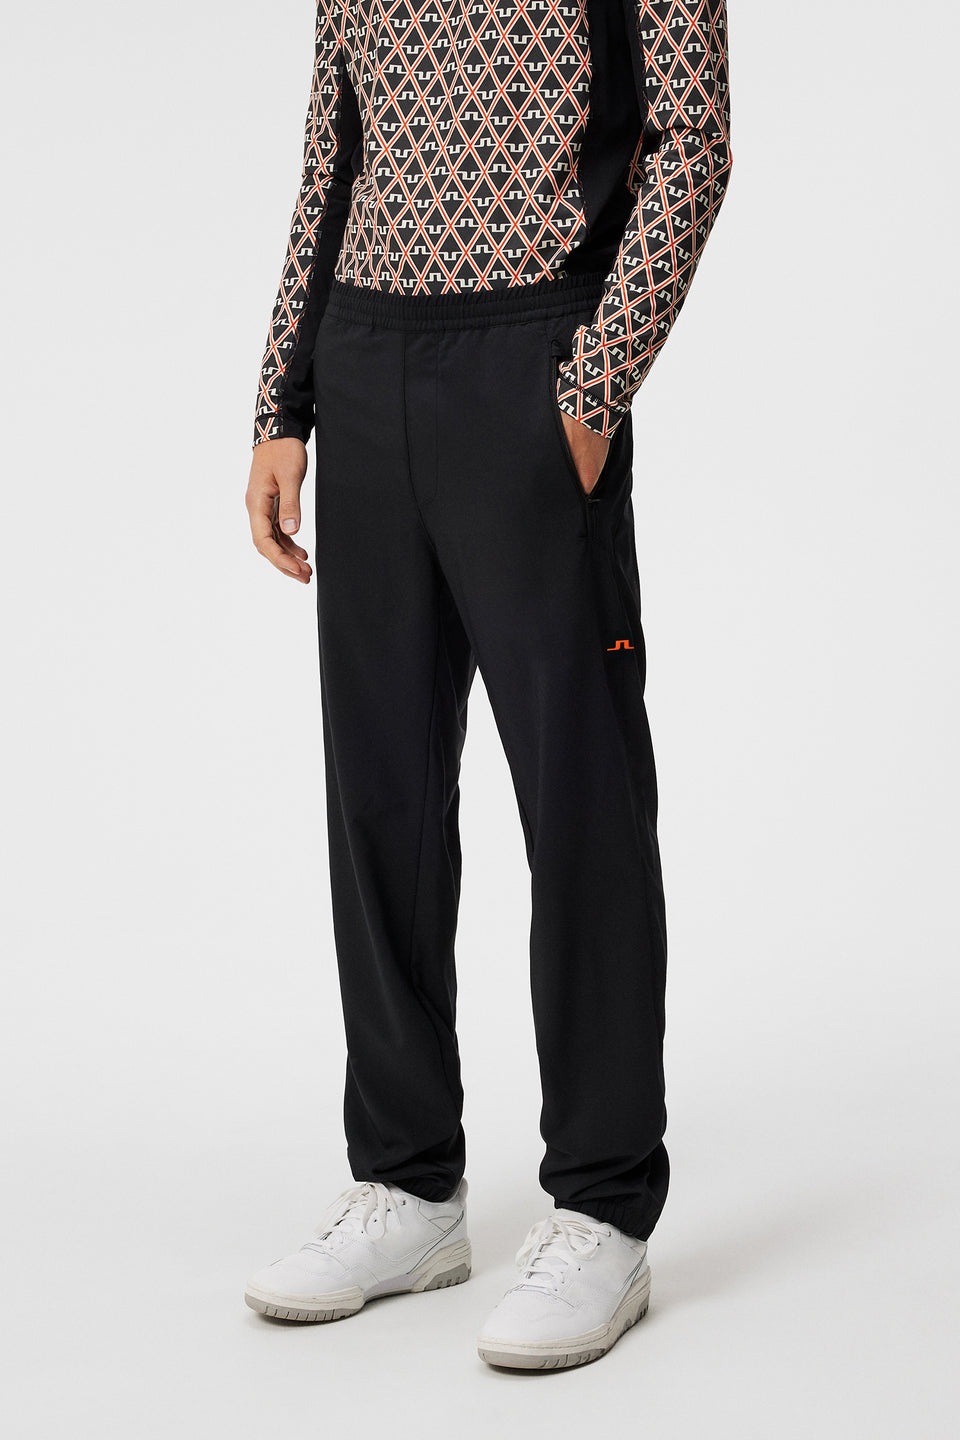 Men's Athleisure: Trousers - J.Lindeberg